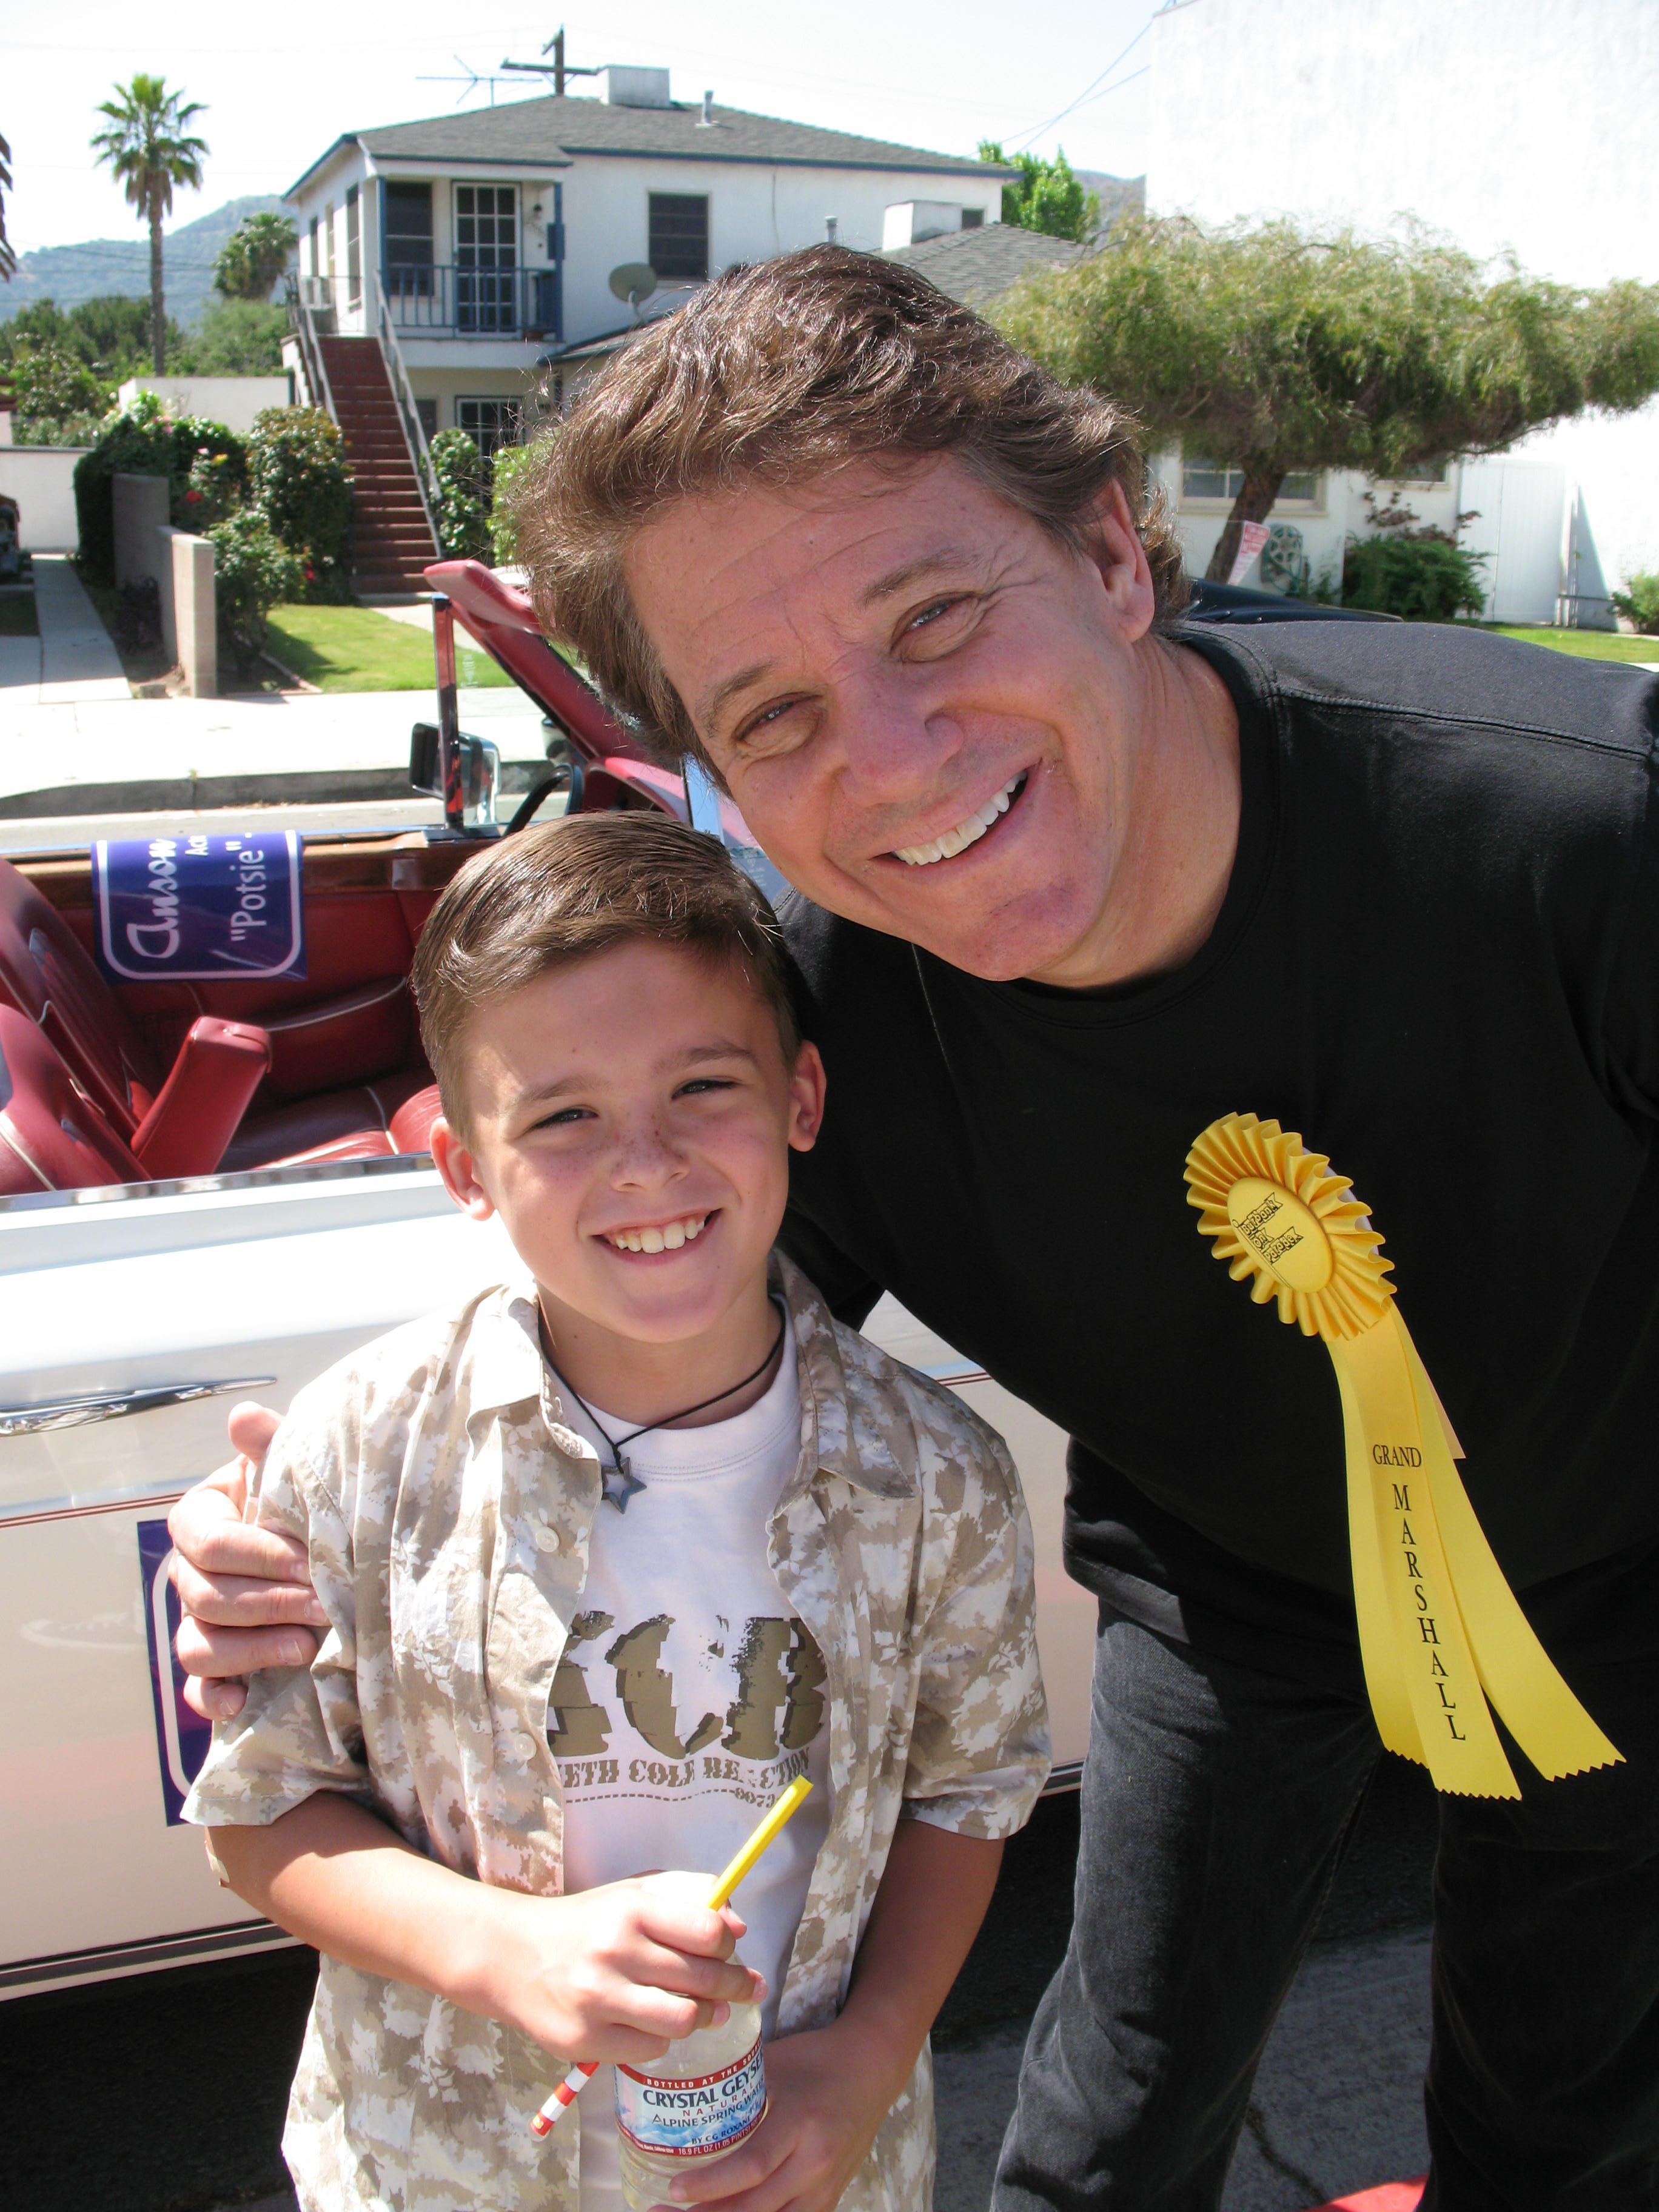 Austin with Anson Williams in the Burbank Day Parade.